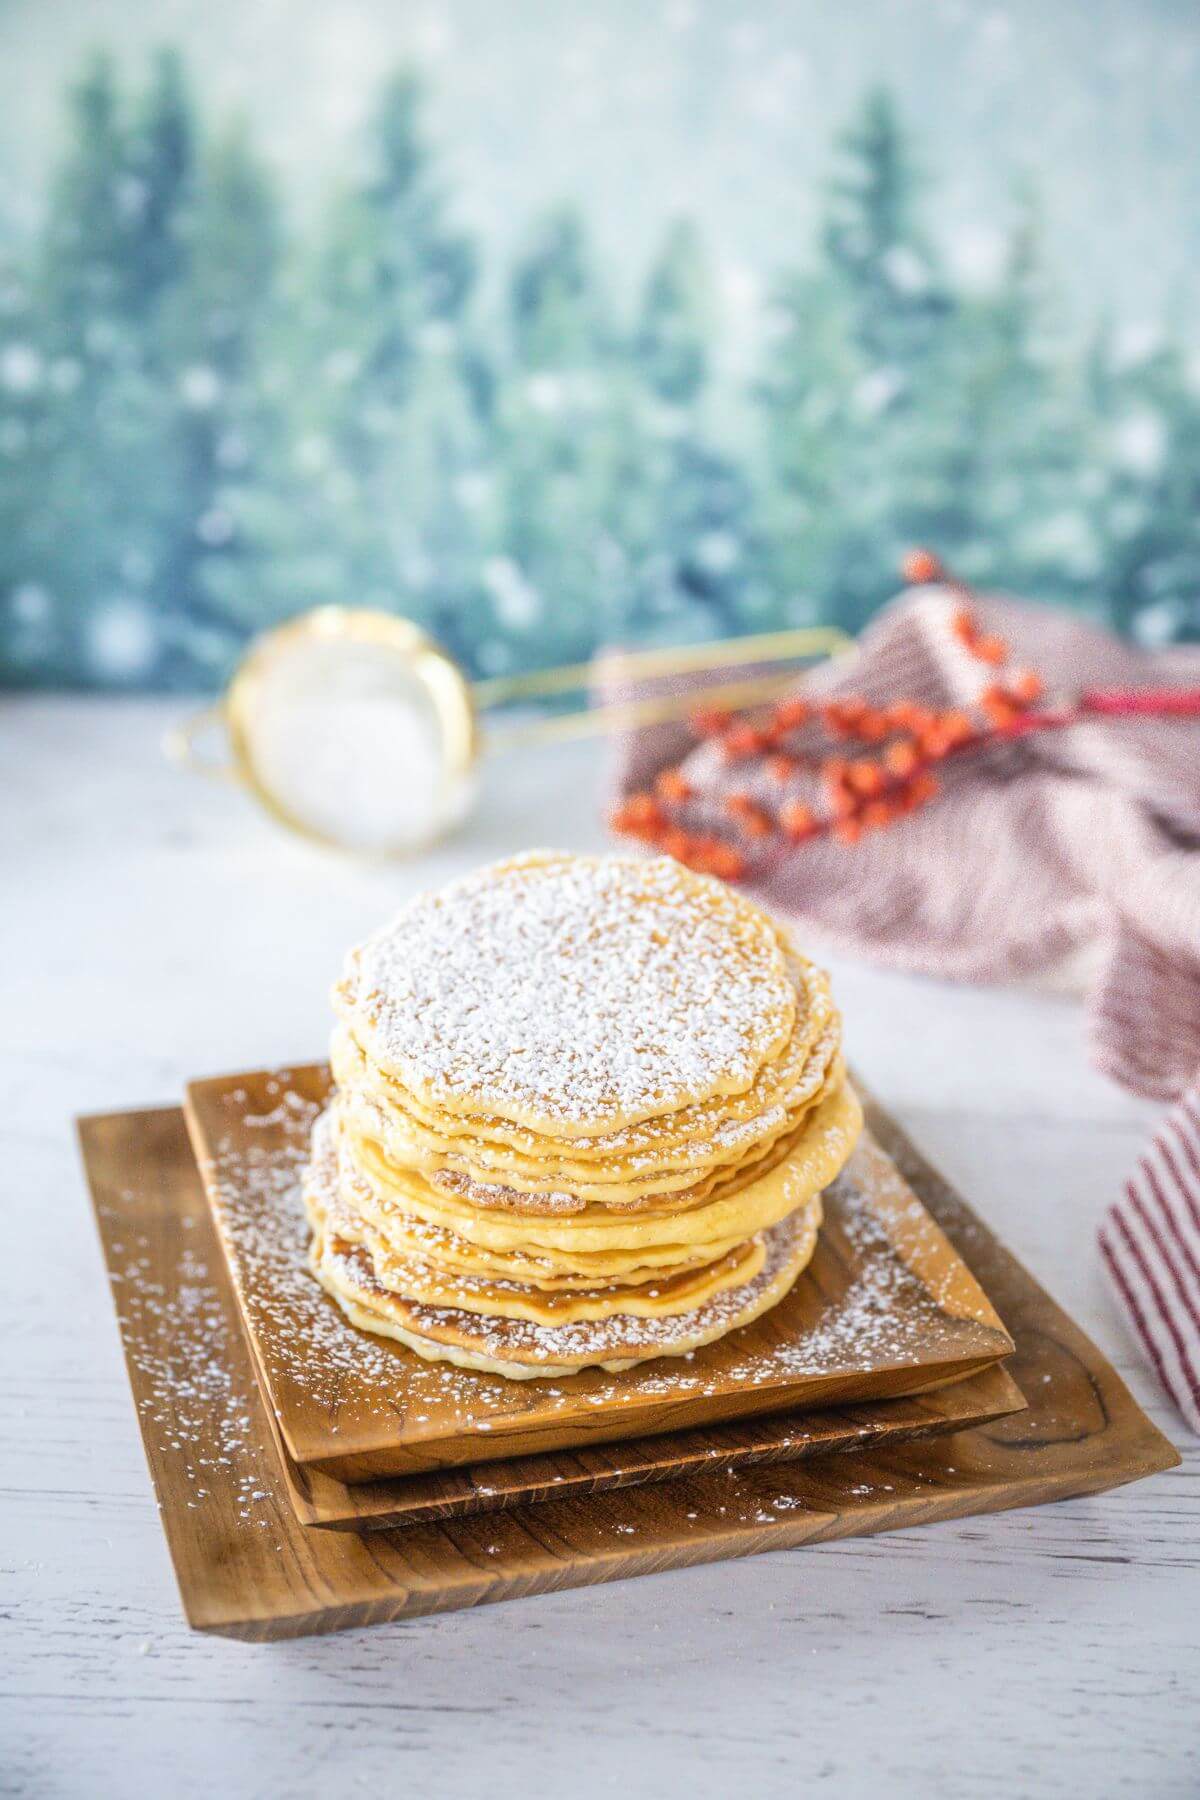 Tall stack of cookies sit on tiered plates in front of wintery scene with trees and red berries.